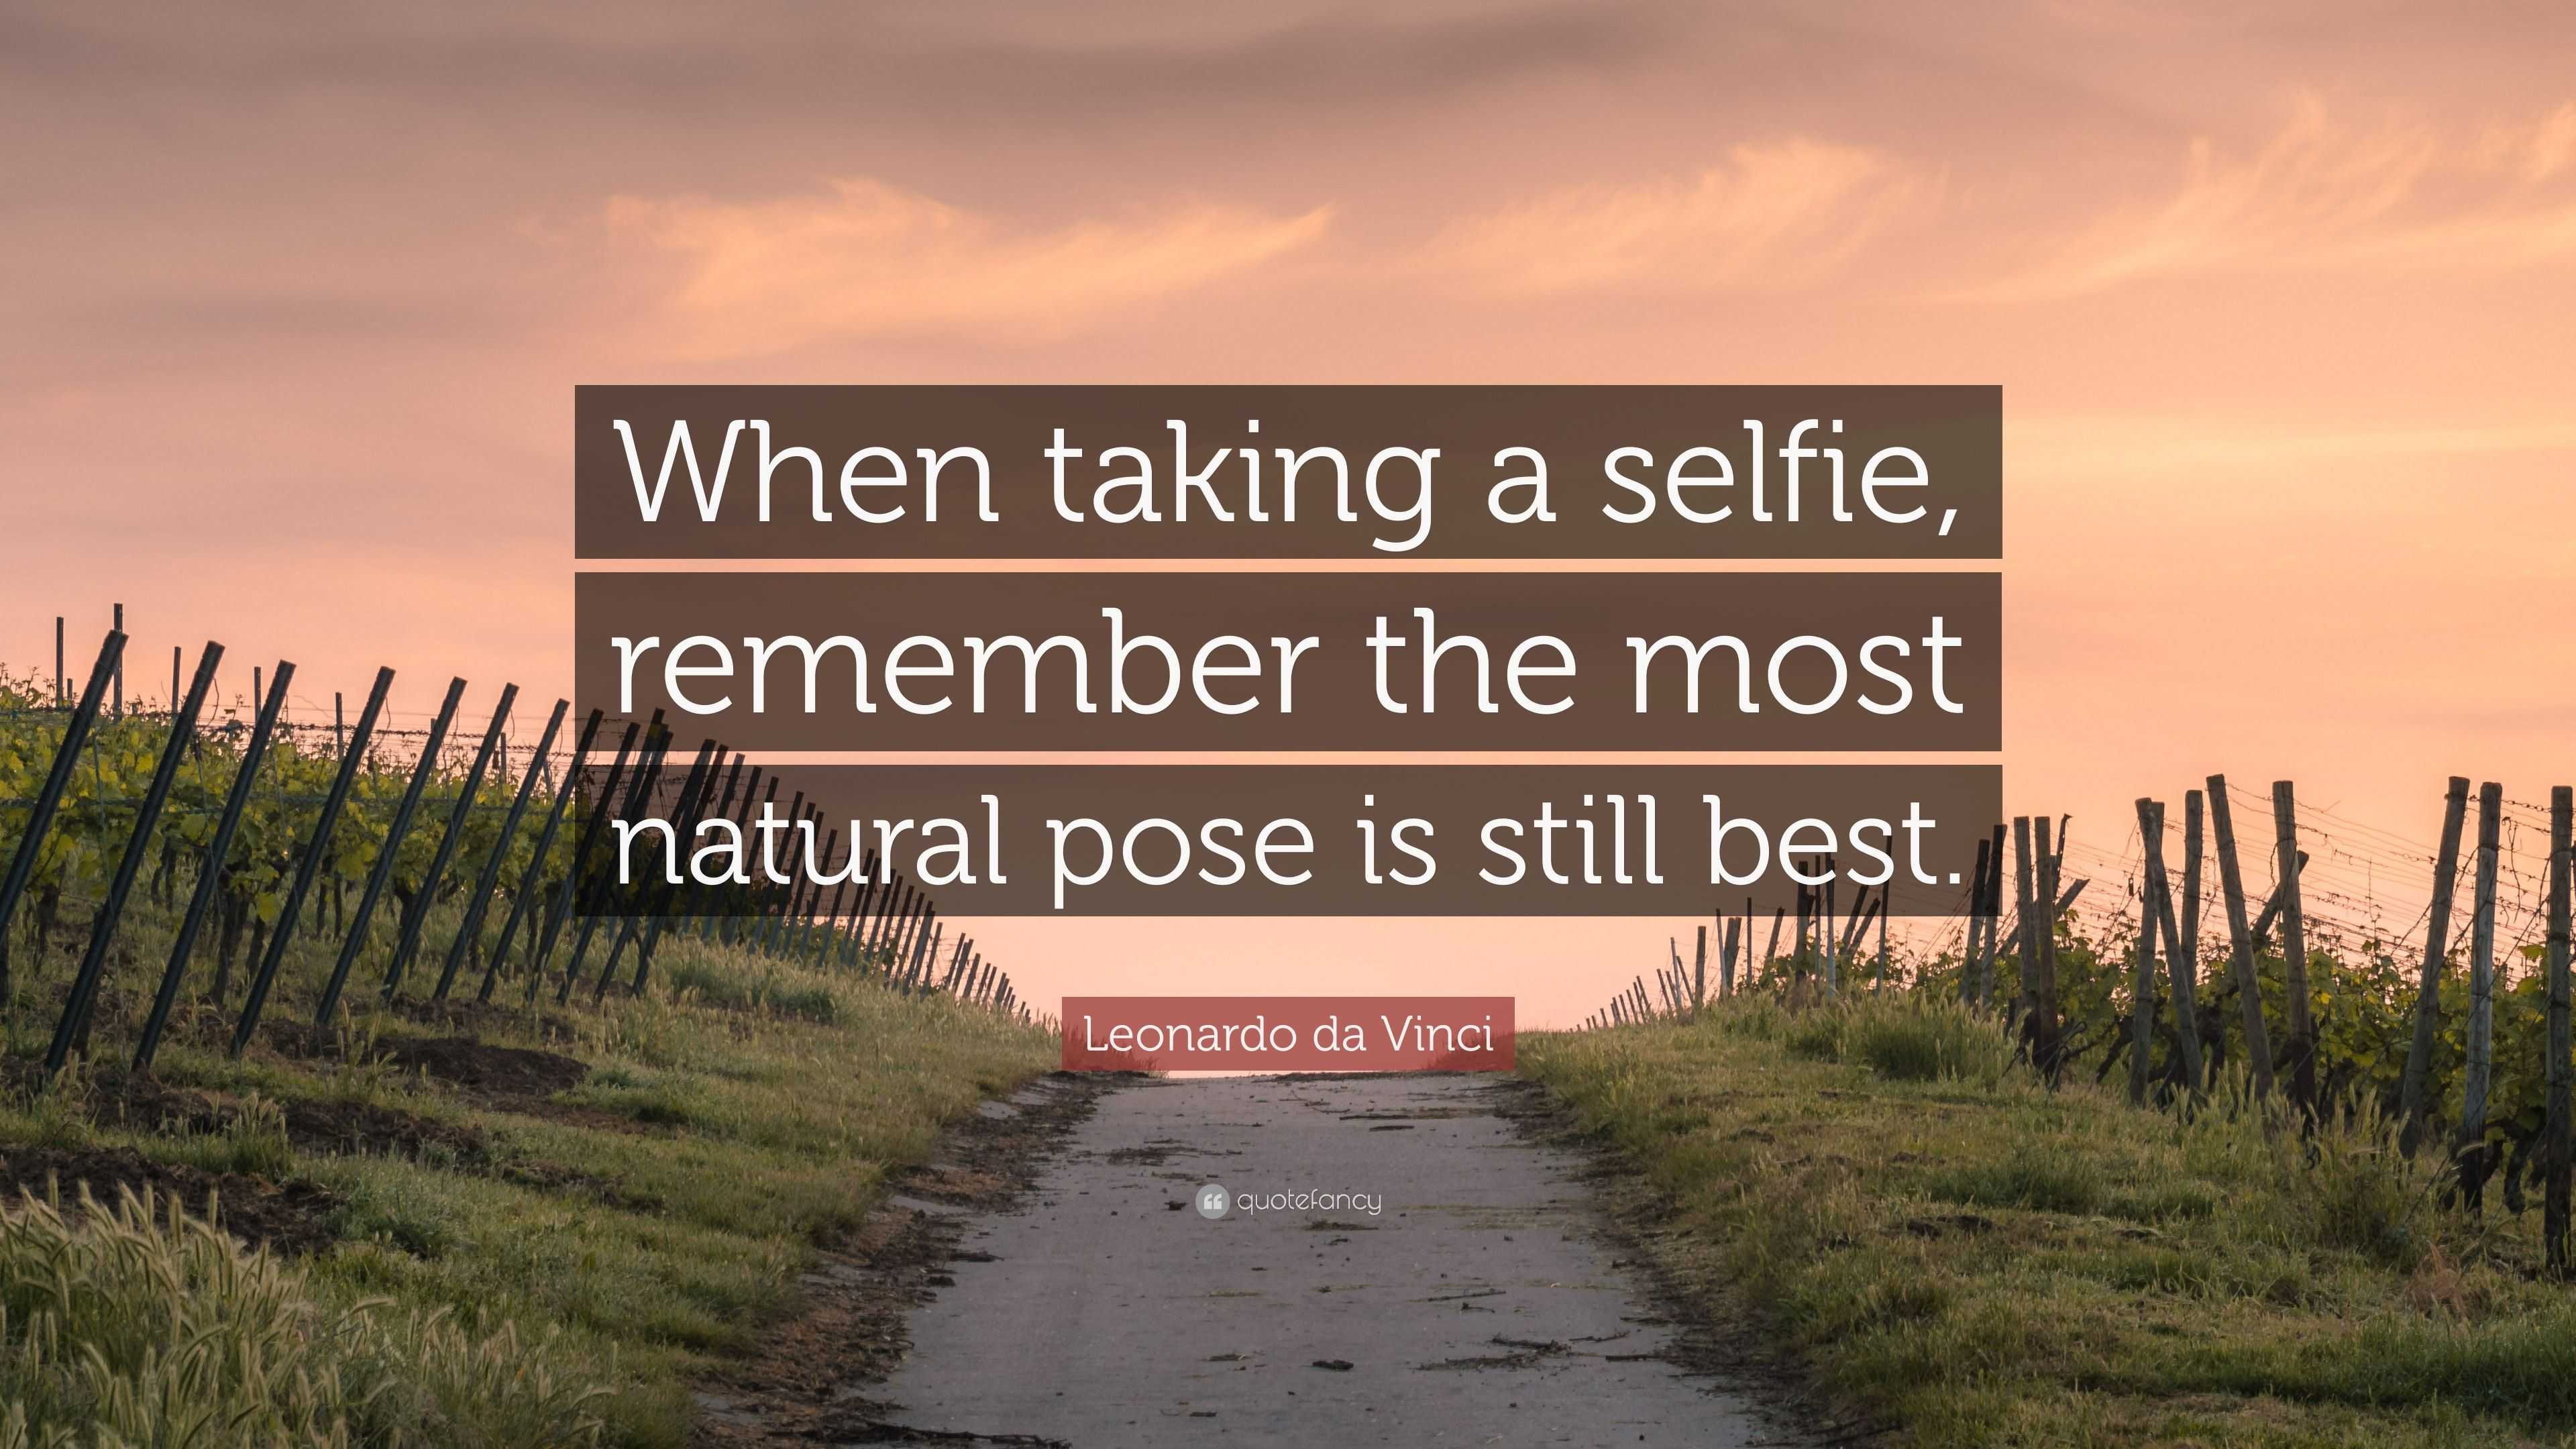 30 Sarcastic Anti-Selfie Quotes For Facebook And Instagram Friends